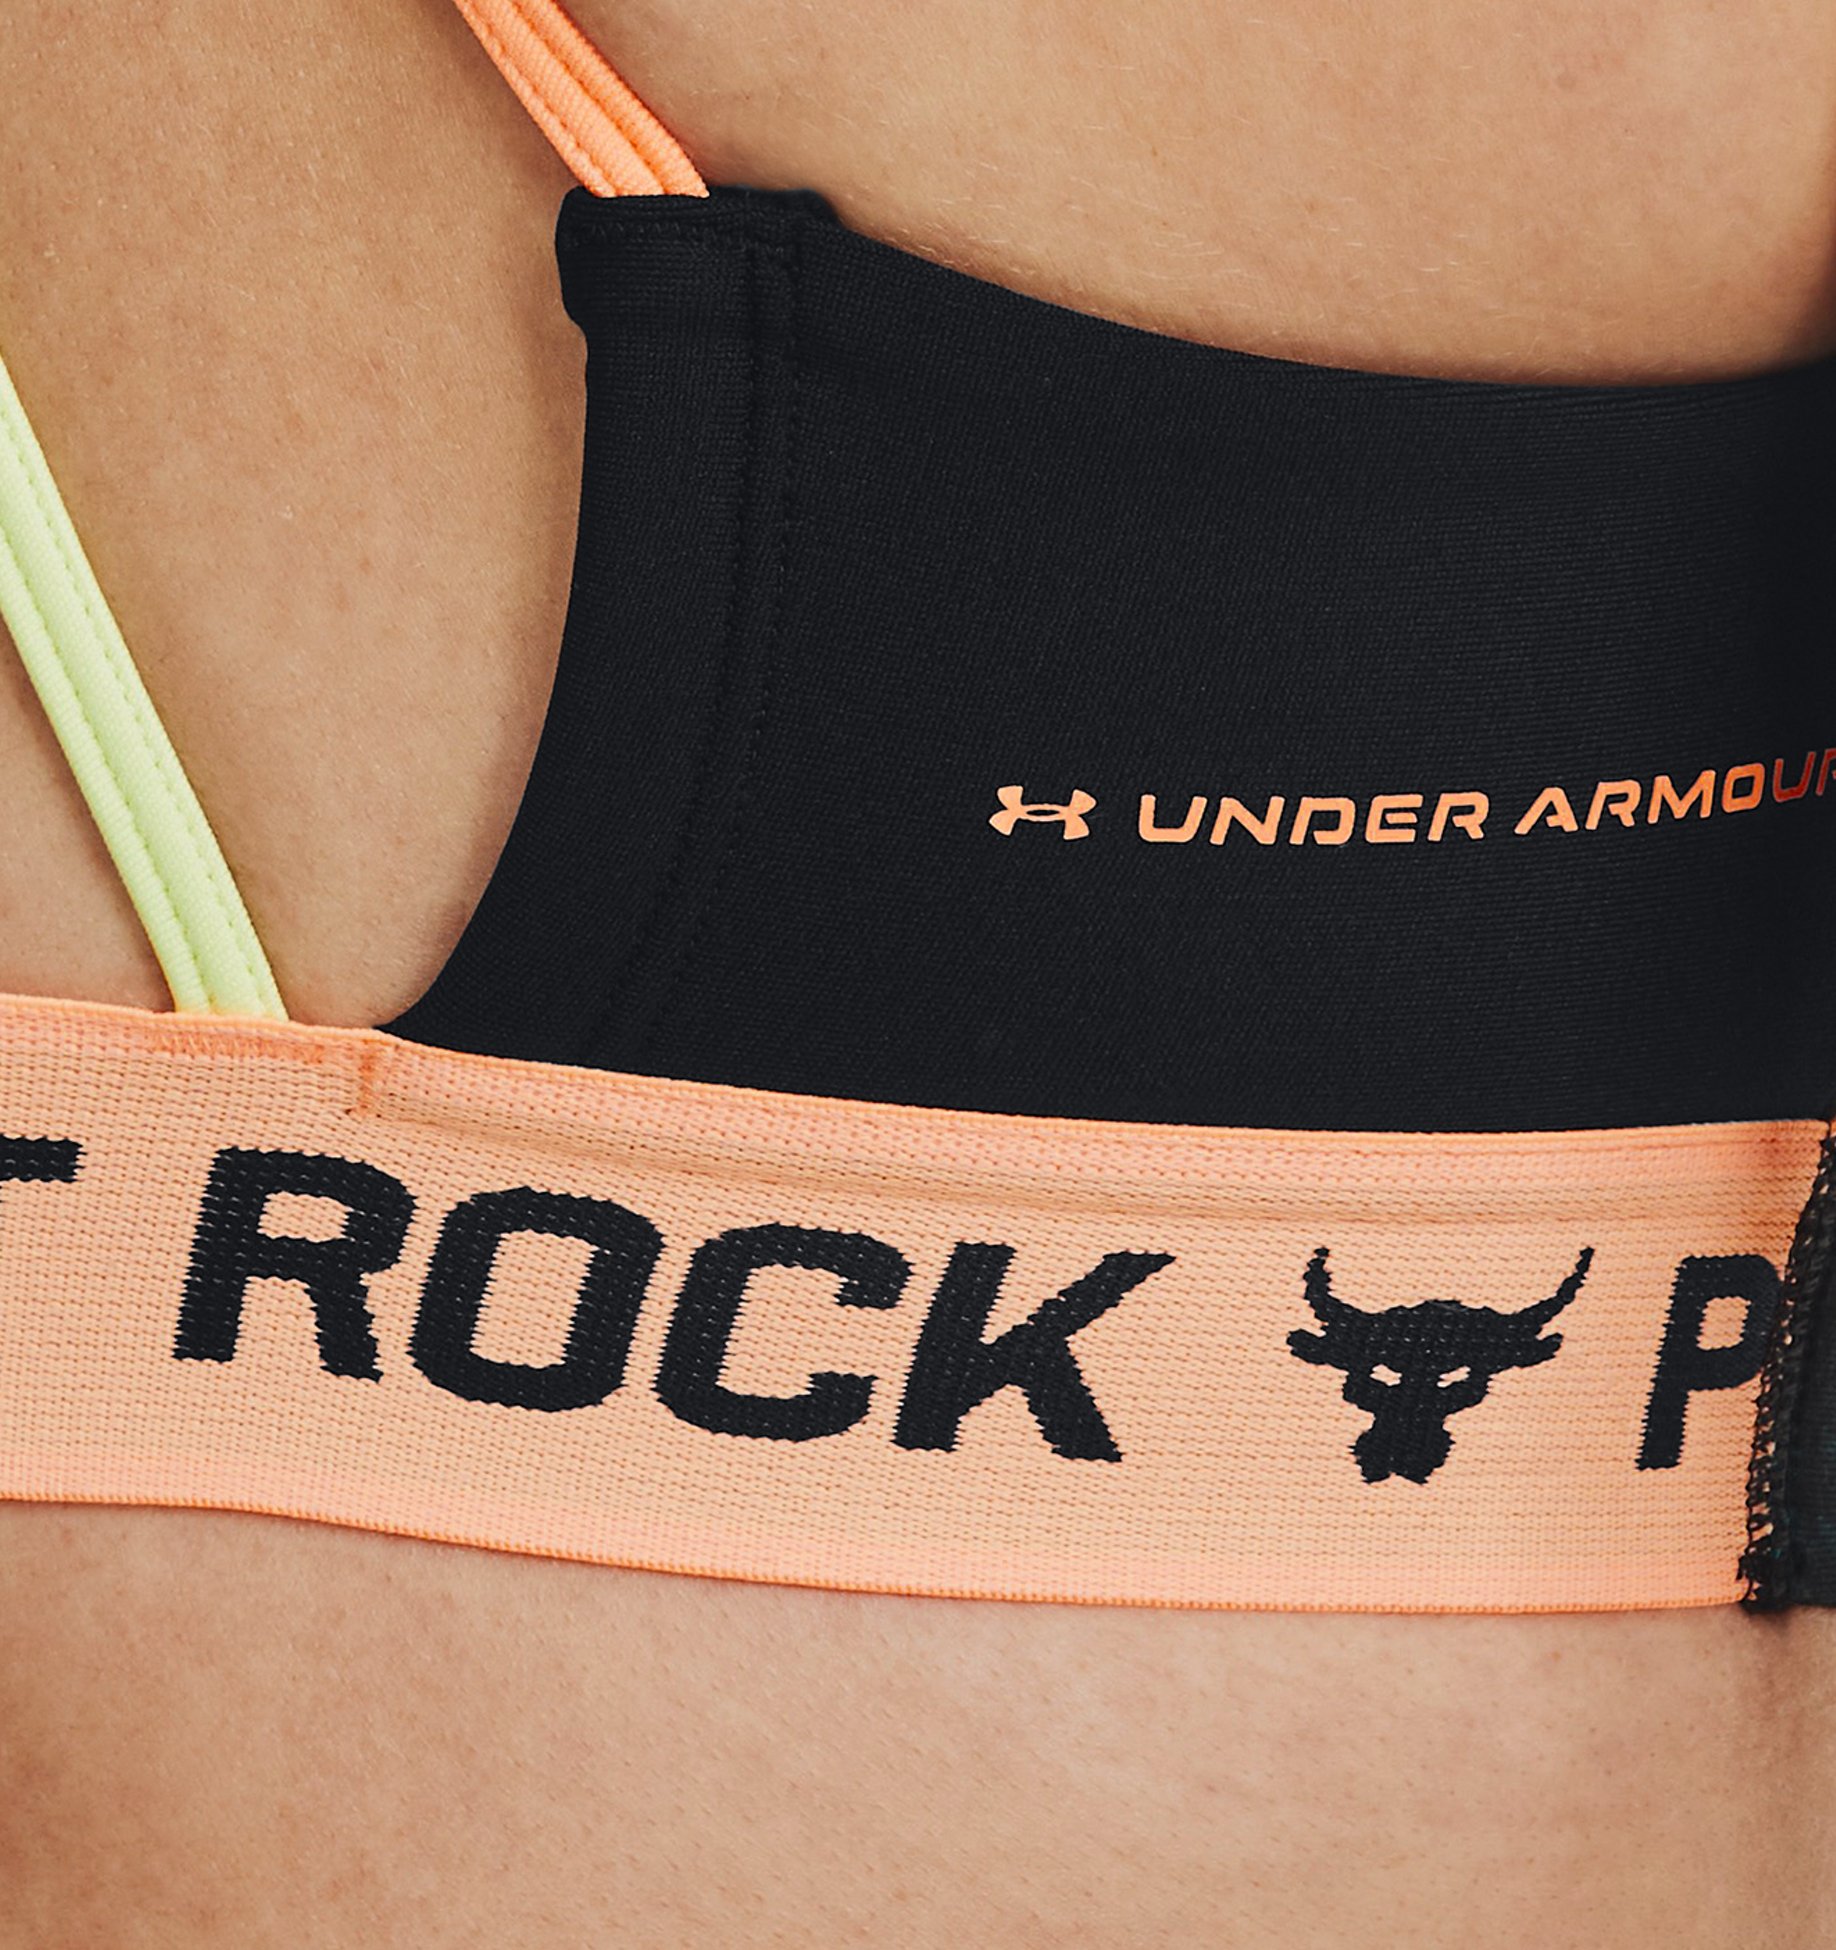 https://underarmour.scene7.com/is/image/Underarmour/V5-1377953-722_BCKDET?rp=standard-0pad|pdpZoomDesktop&scl=0.72&fmt=jpg&qlt=85&resMode=sharp2&cache=on,on&bgc=f0f0f0&wid=1836&hei=1950&size=1500,1500